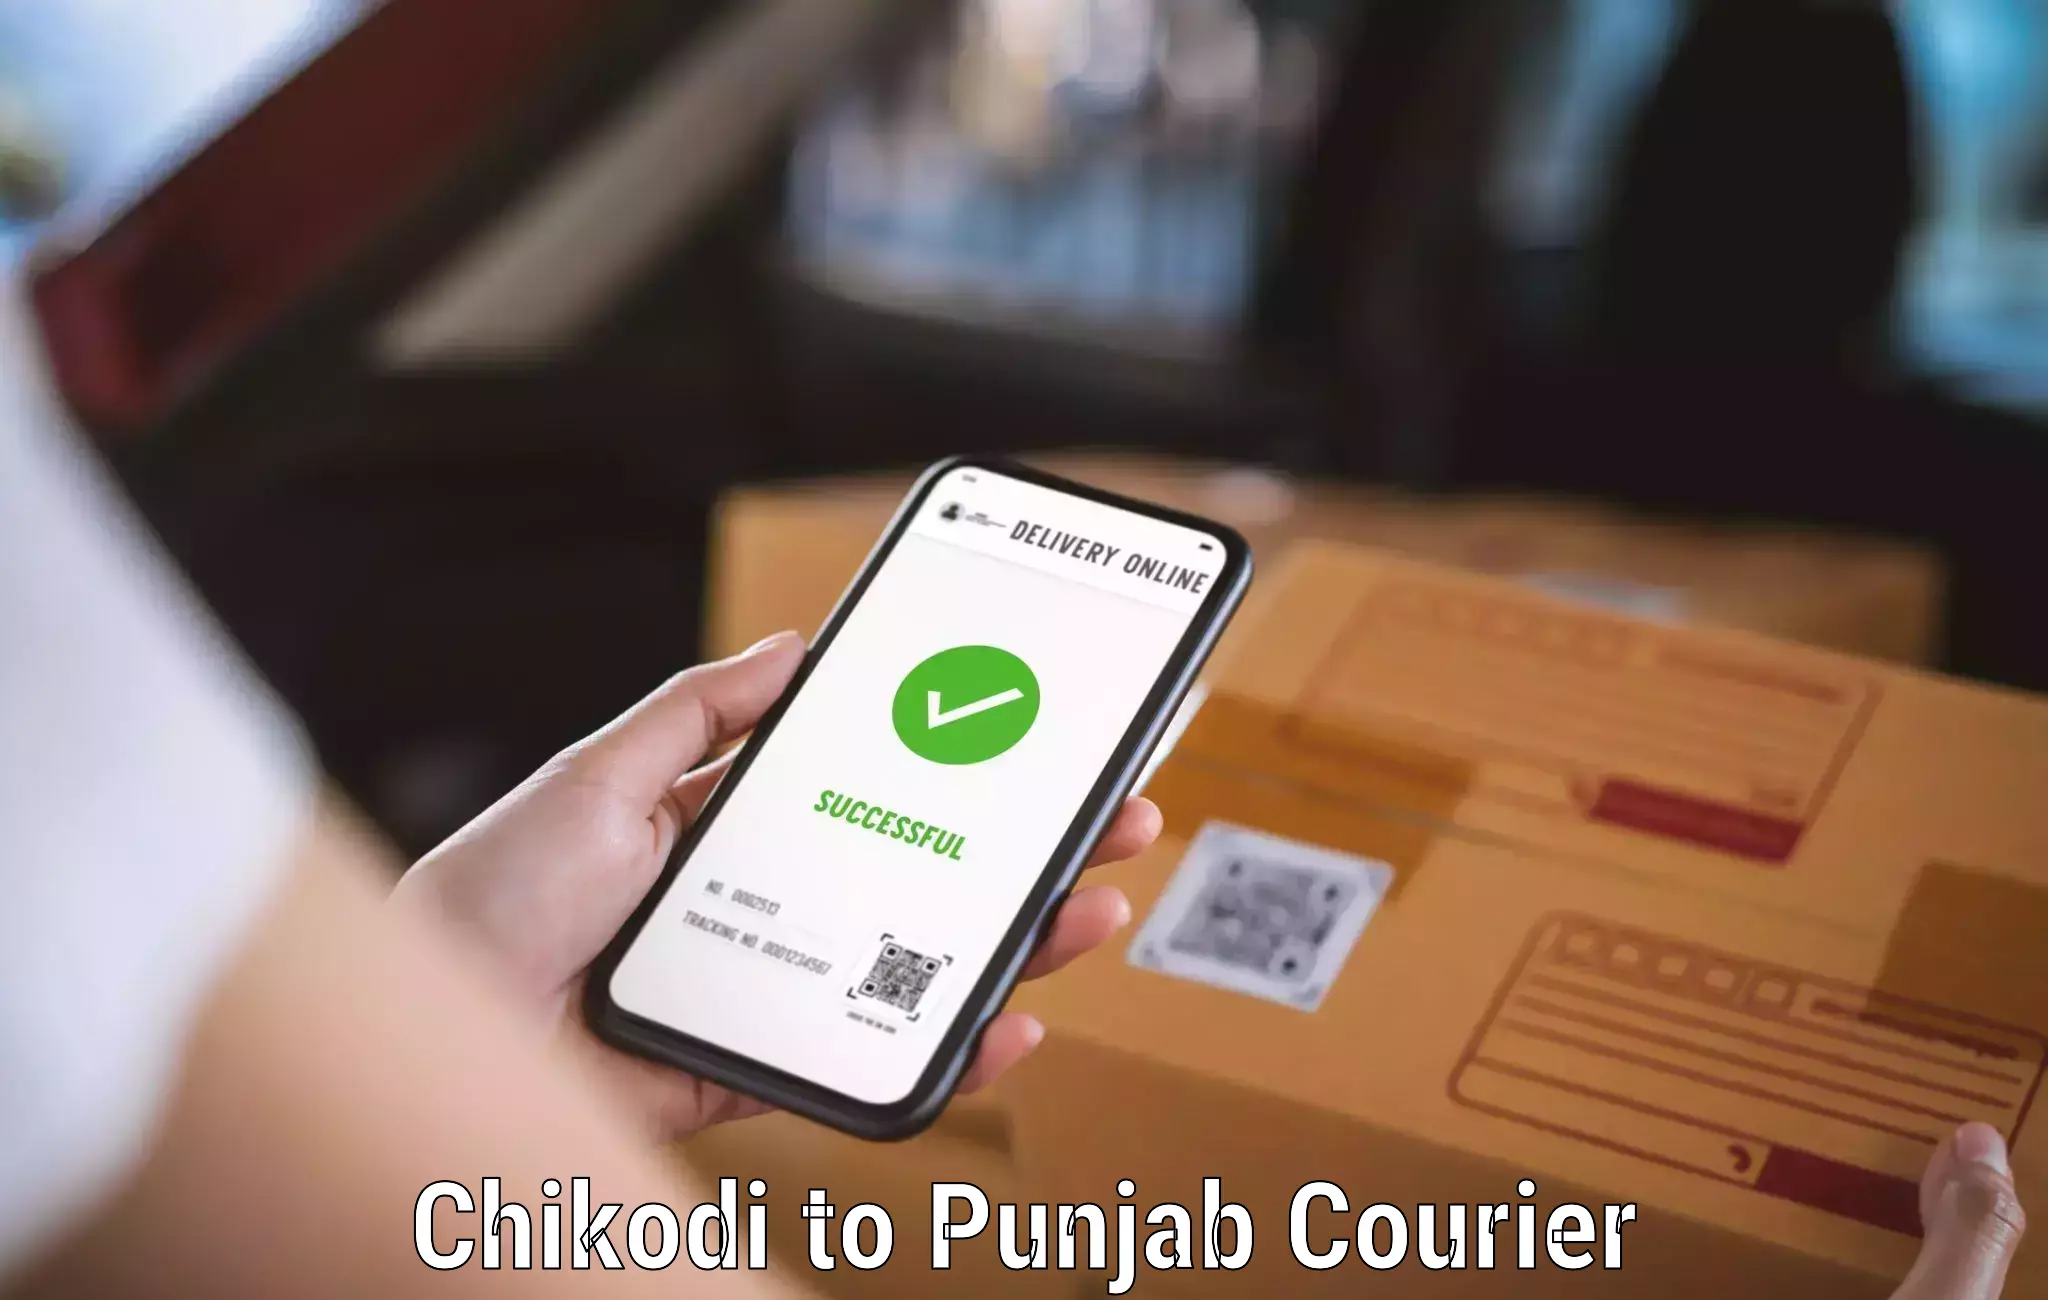 Fast delivery service Chikodi to Punjab